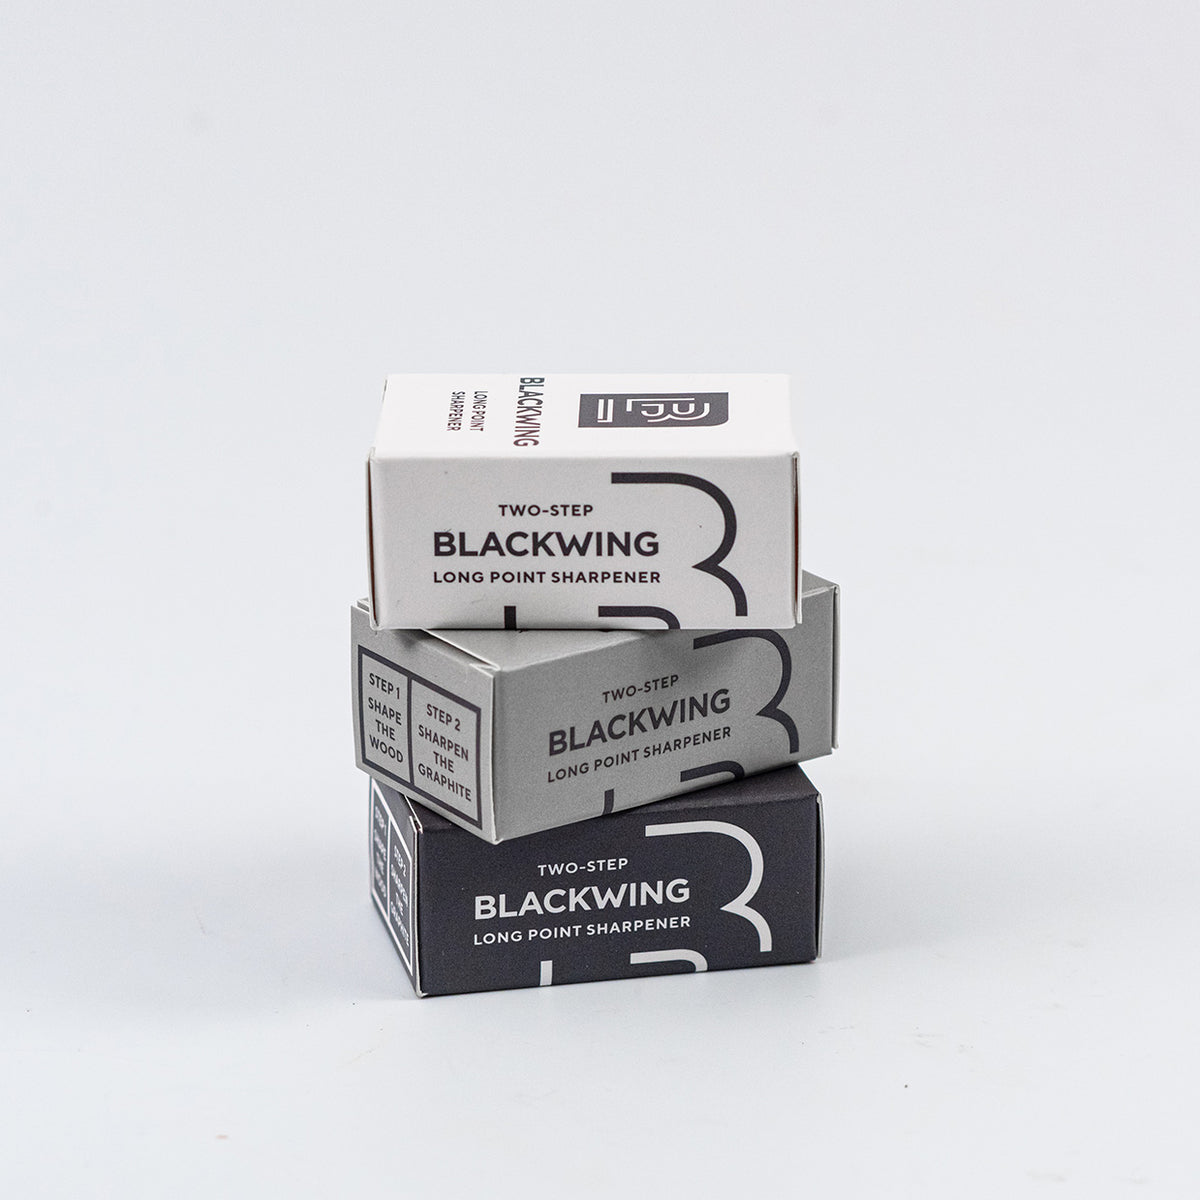 BLACKWING Sharpener, Two-Step Long Point – Take Note Pens & Stationery